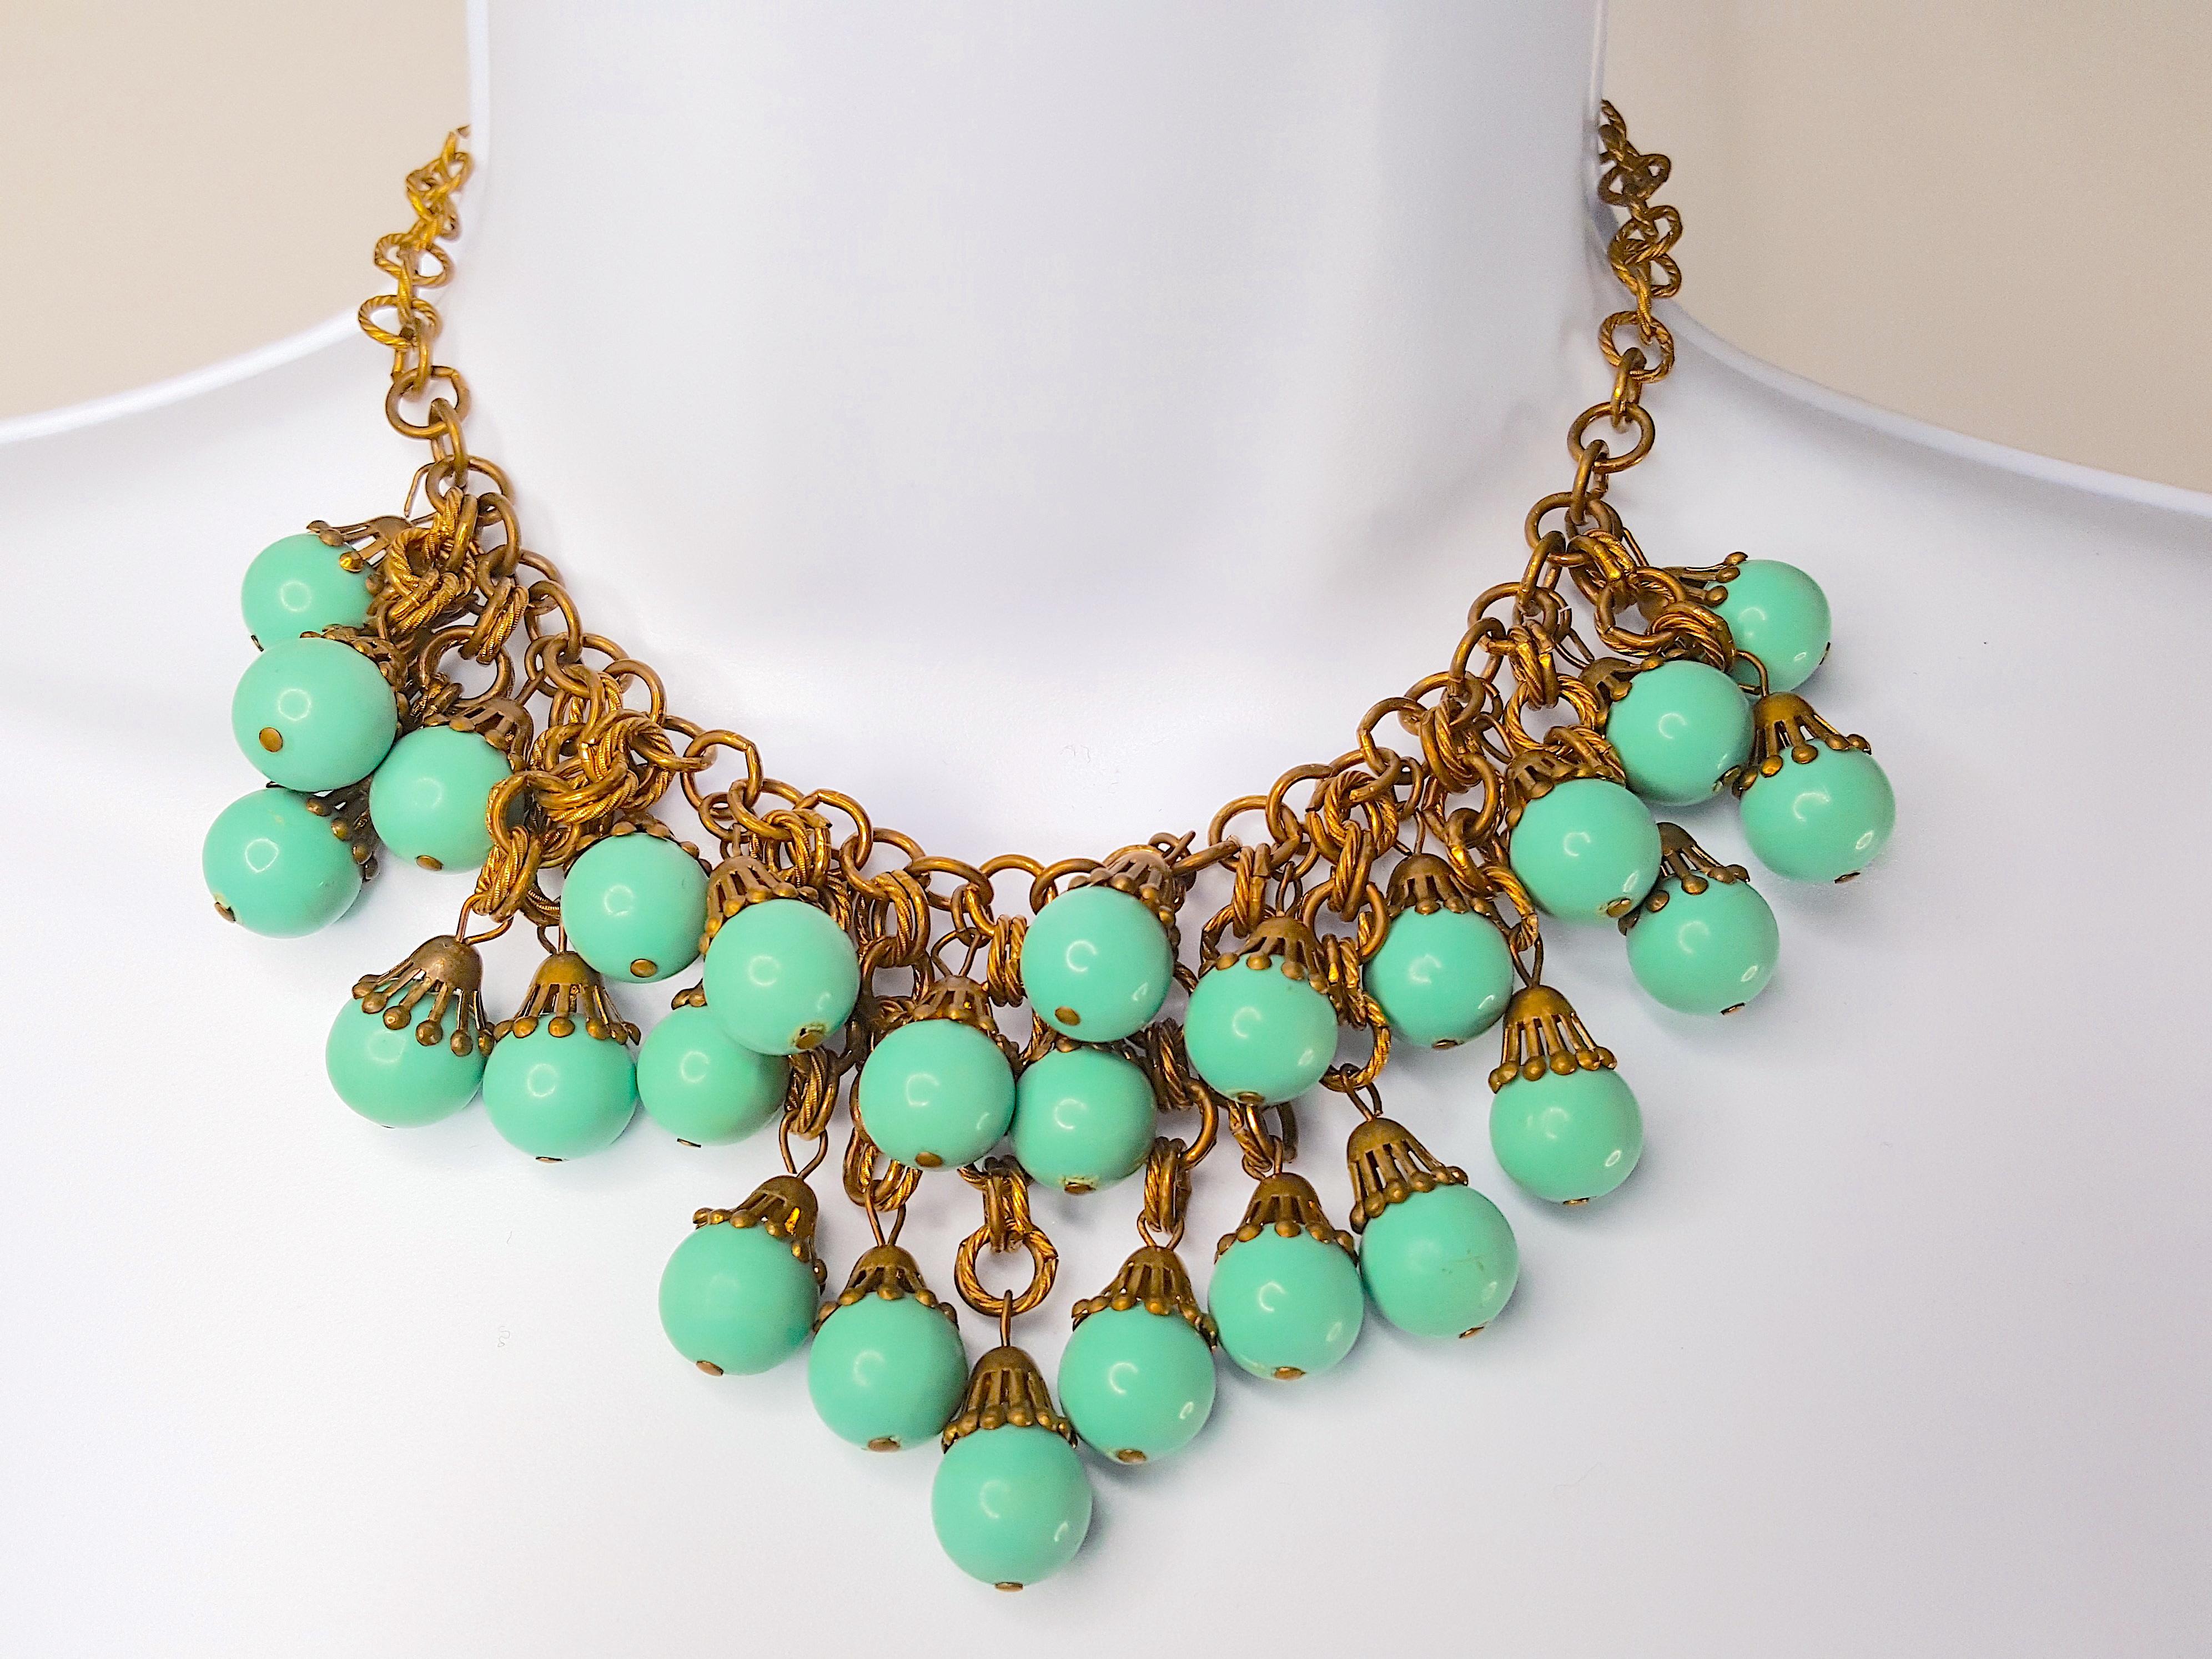 Around 1930, Miriam Haskell's first designer Frank Hess designed this Russian-gilt brass ribbed-chain link bib necklace featuring 27 strands of varying length each wired to aqua faux-turquoise pressed glass beads with characteristic gold